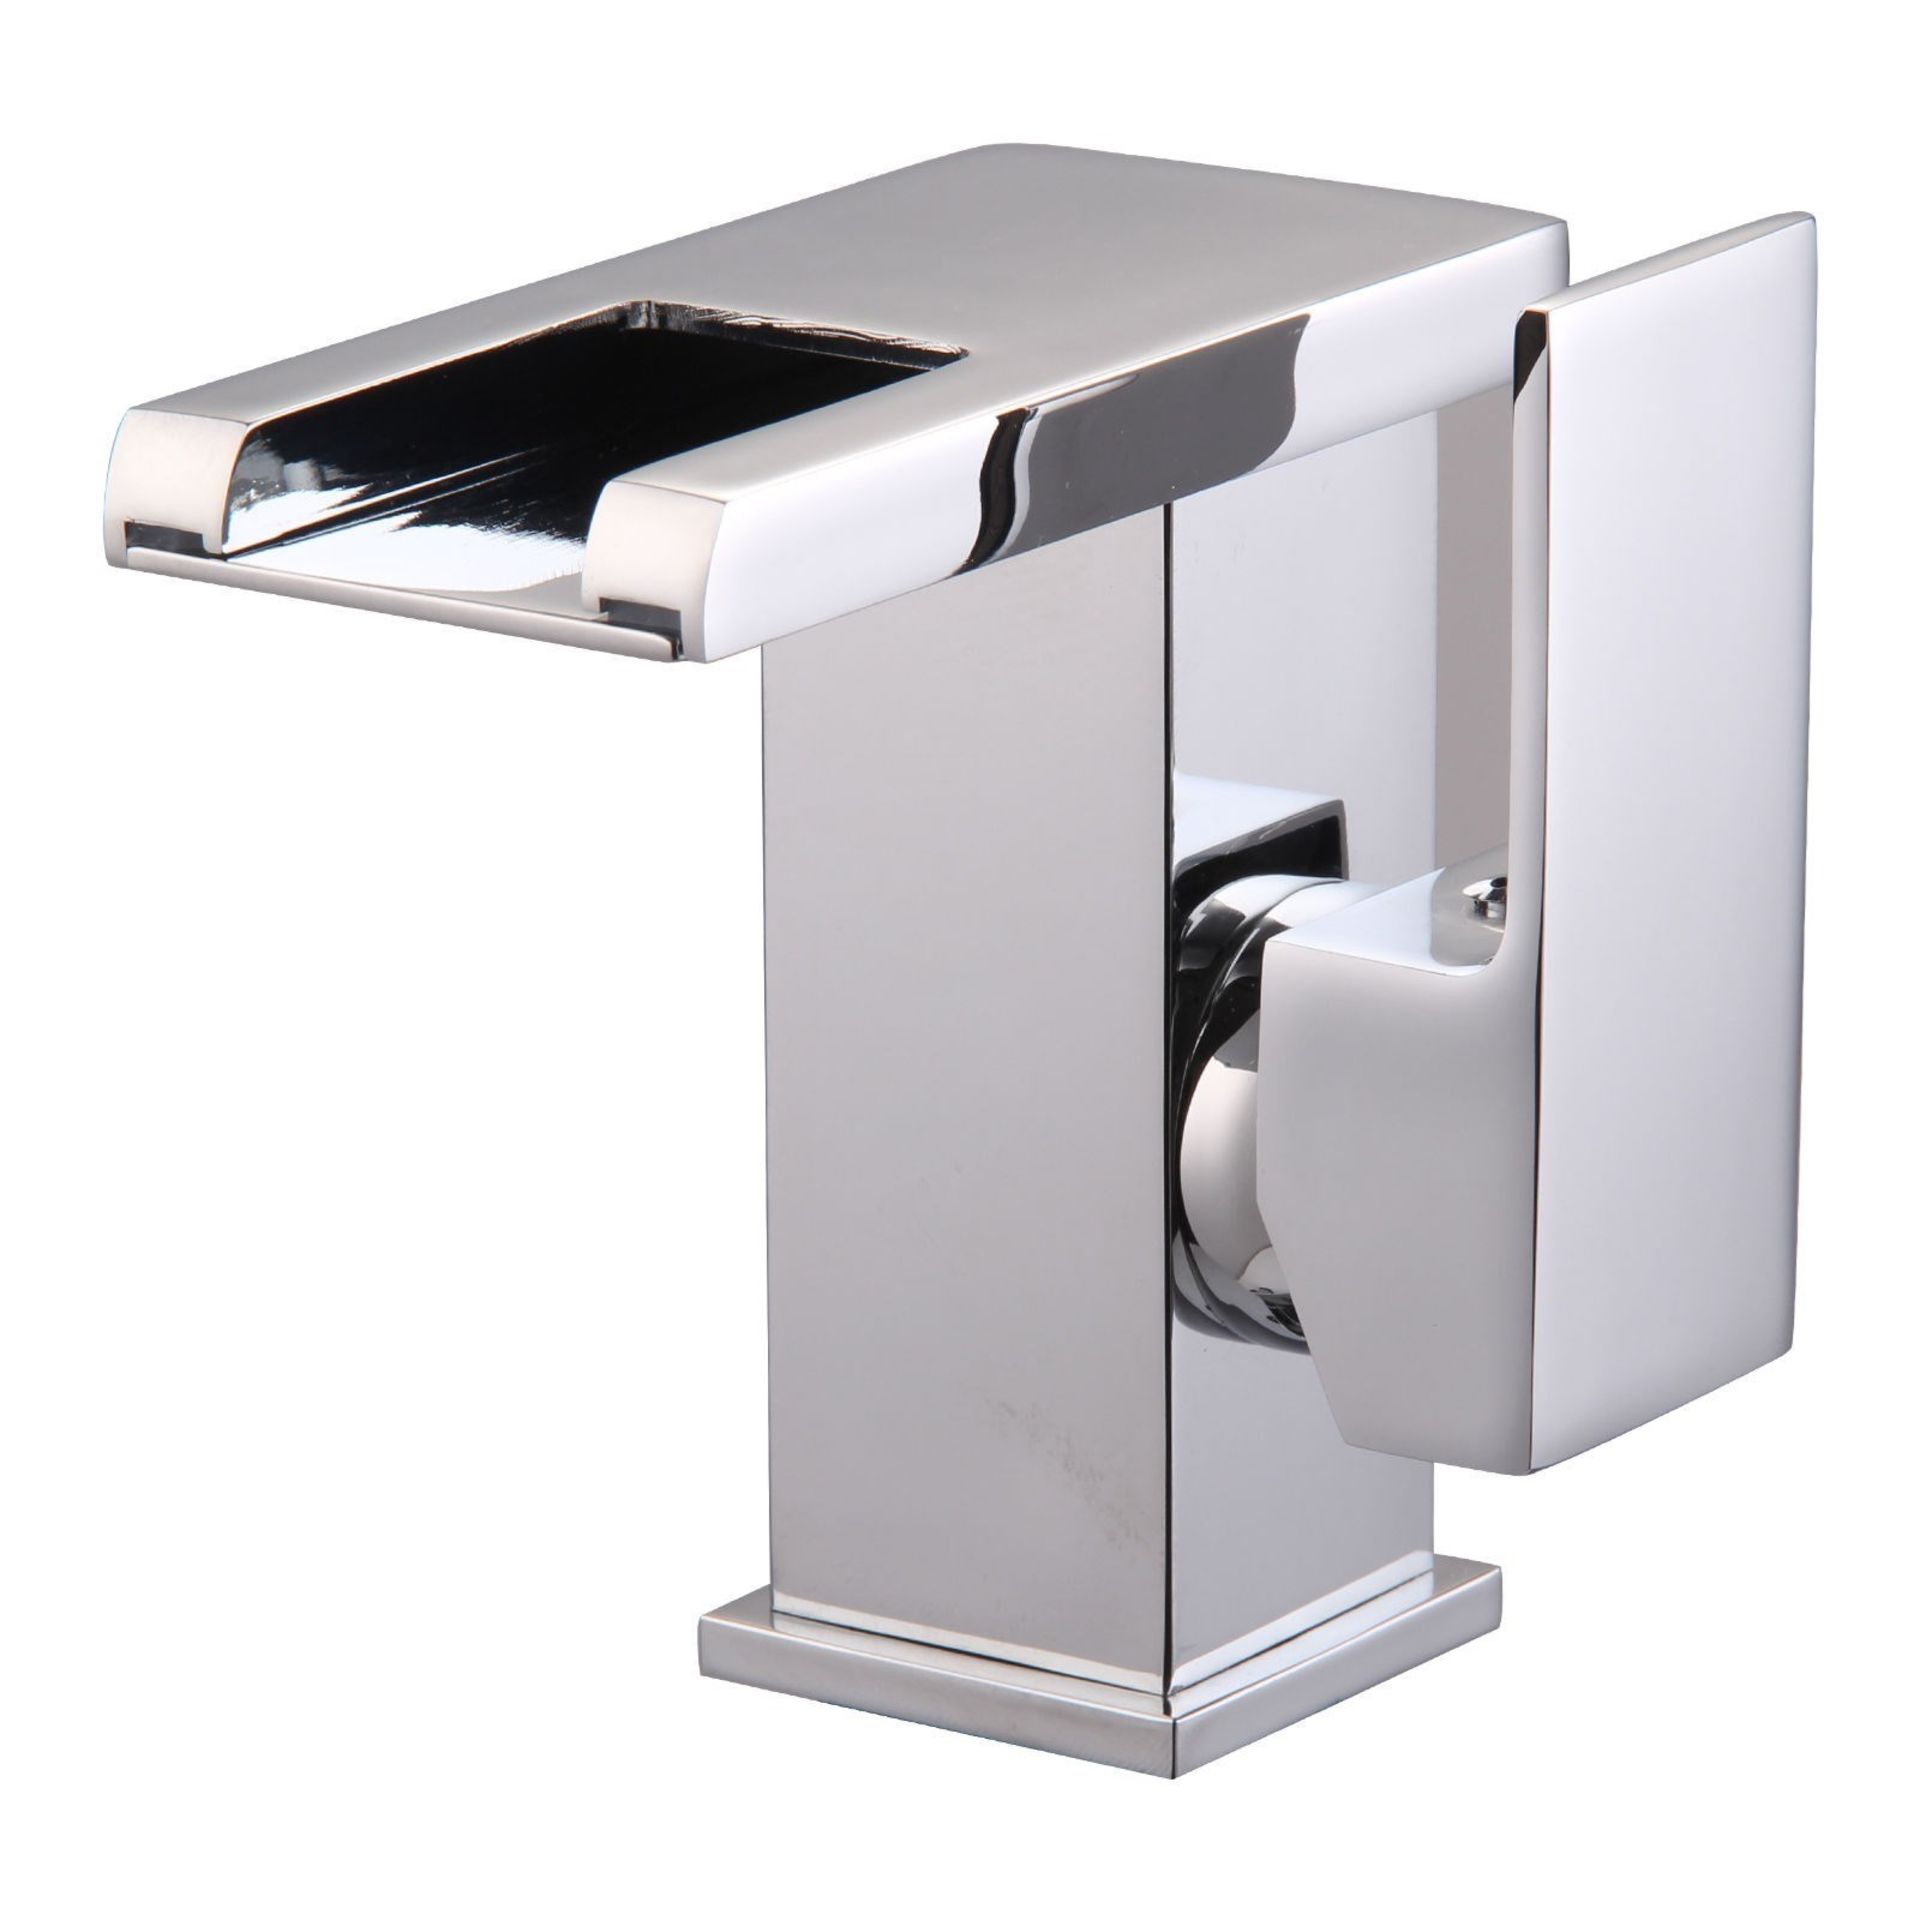 (M1098) LED Waterfall Bathroom Basin Mixer Tap. RRP £229.99.Easy to install and clean. All c... - Image 2 of 3